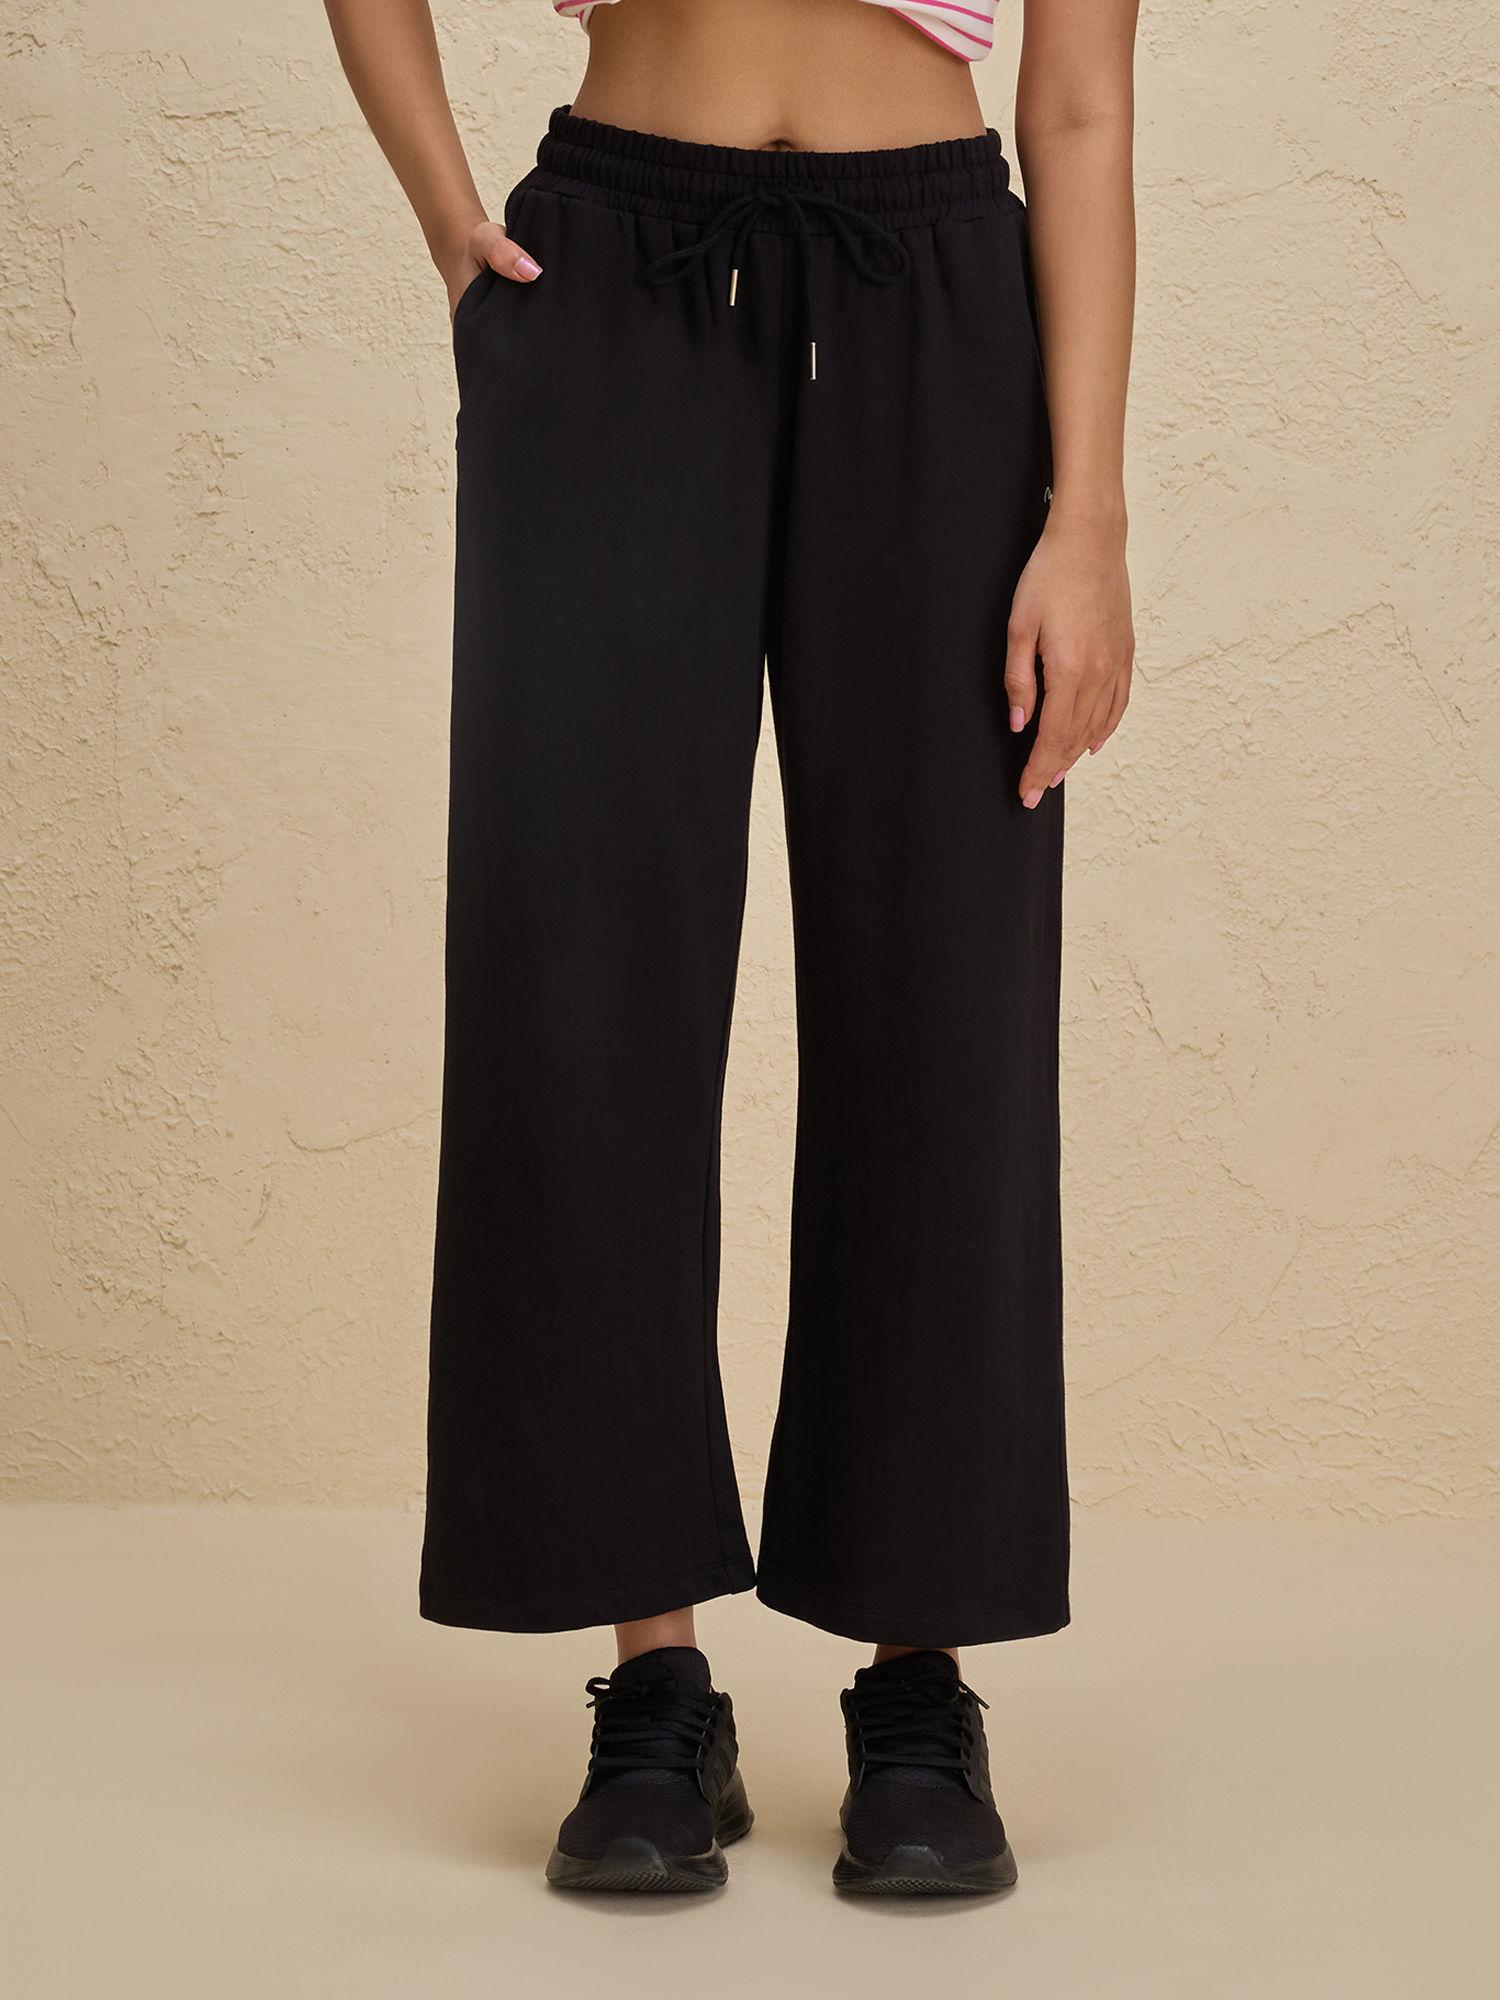 comfort cotton french terry straight leg lounge track pants-nyle606-black